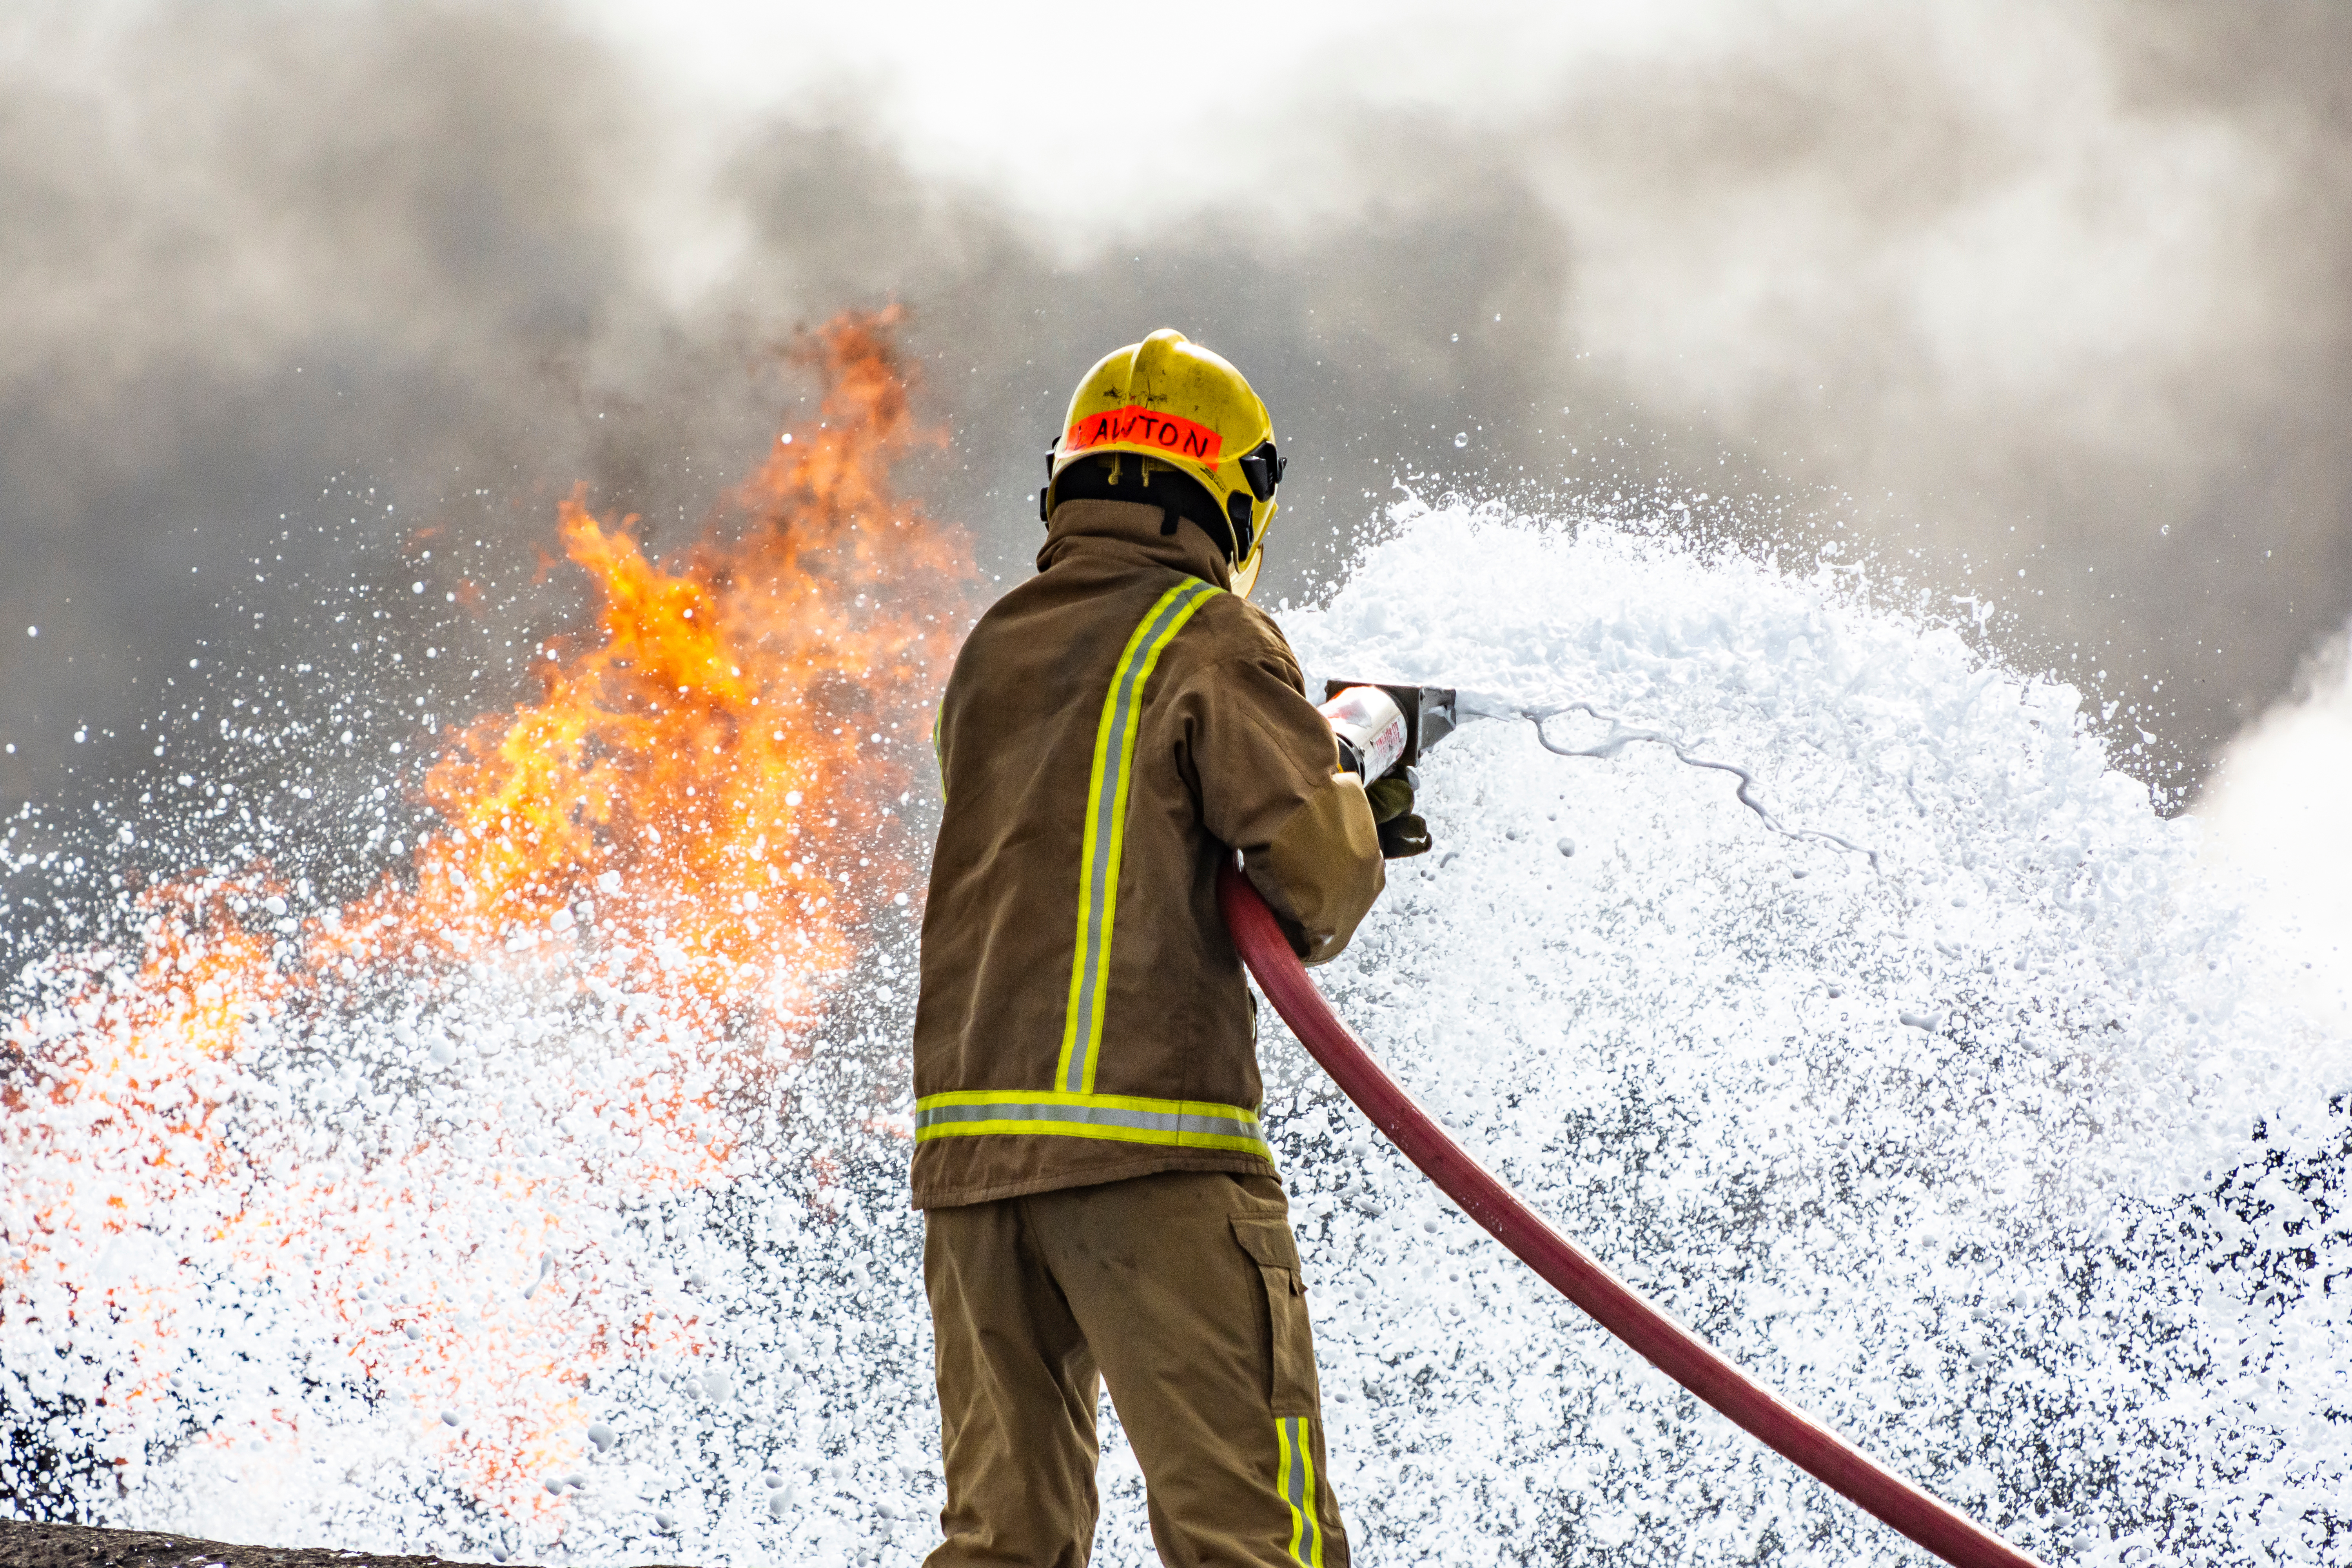 Firefighter using Aqueous Film Forming Foam (AFFF) to fight a fire, which usually contains PFAS